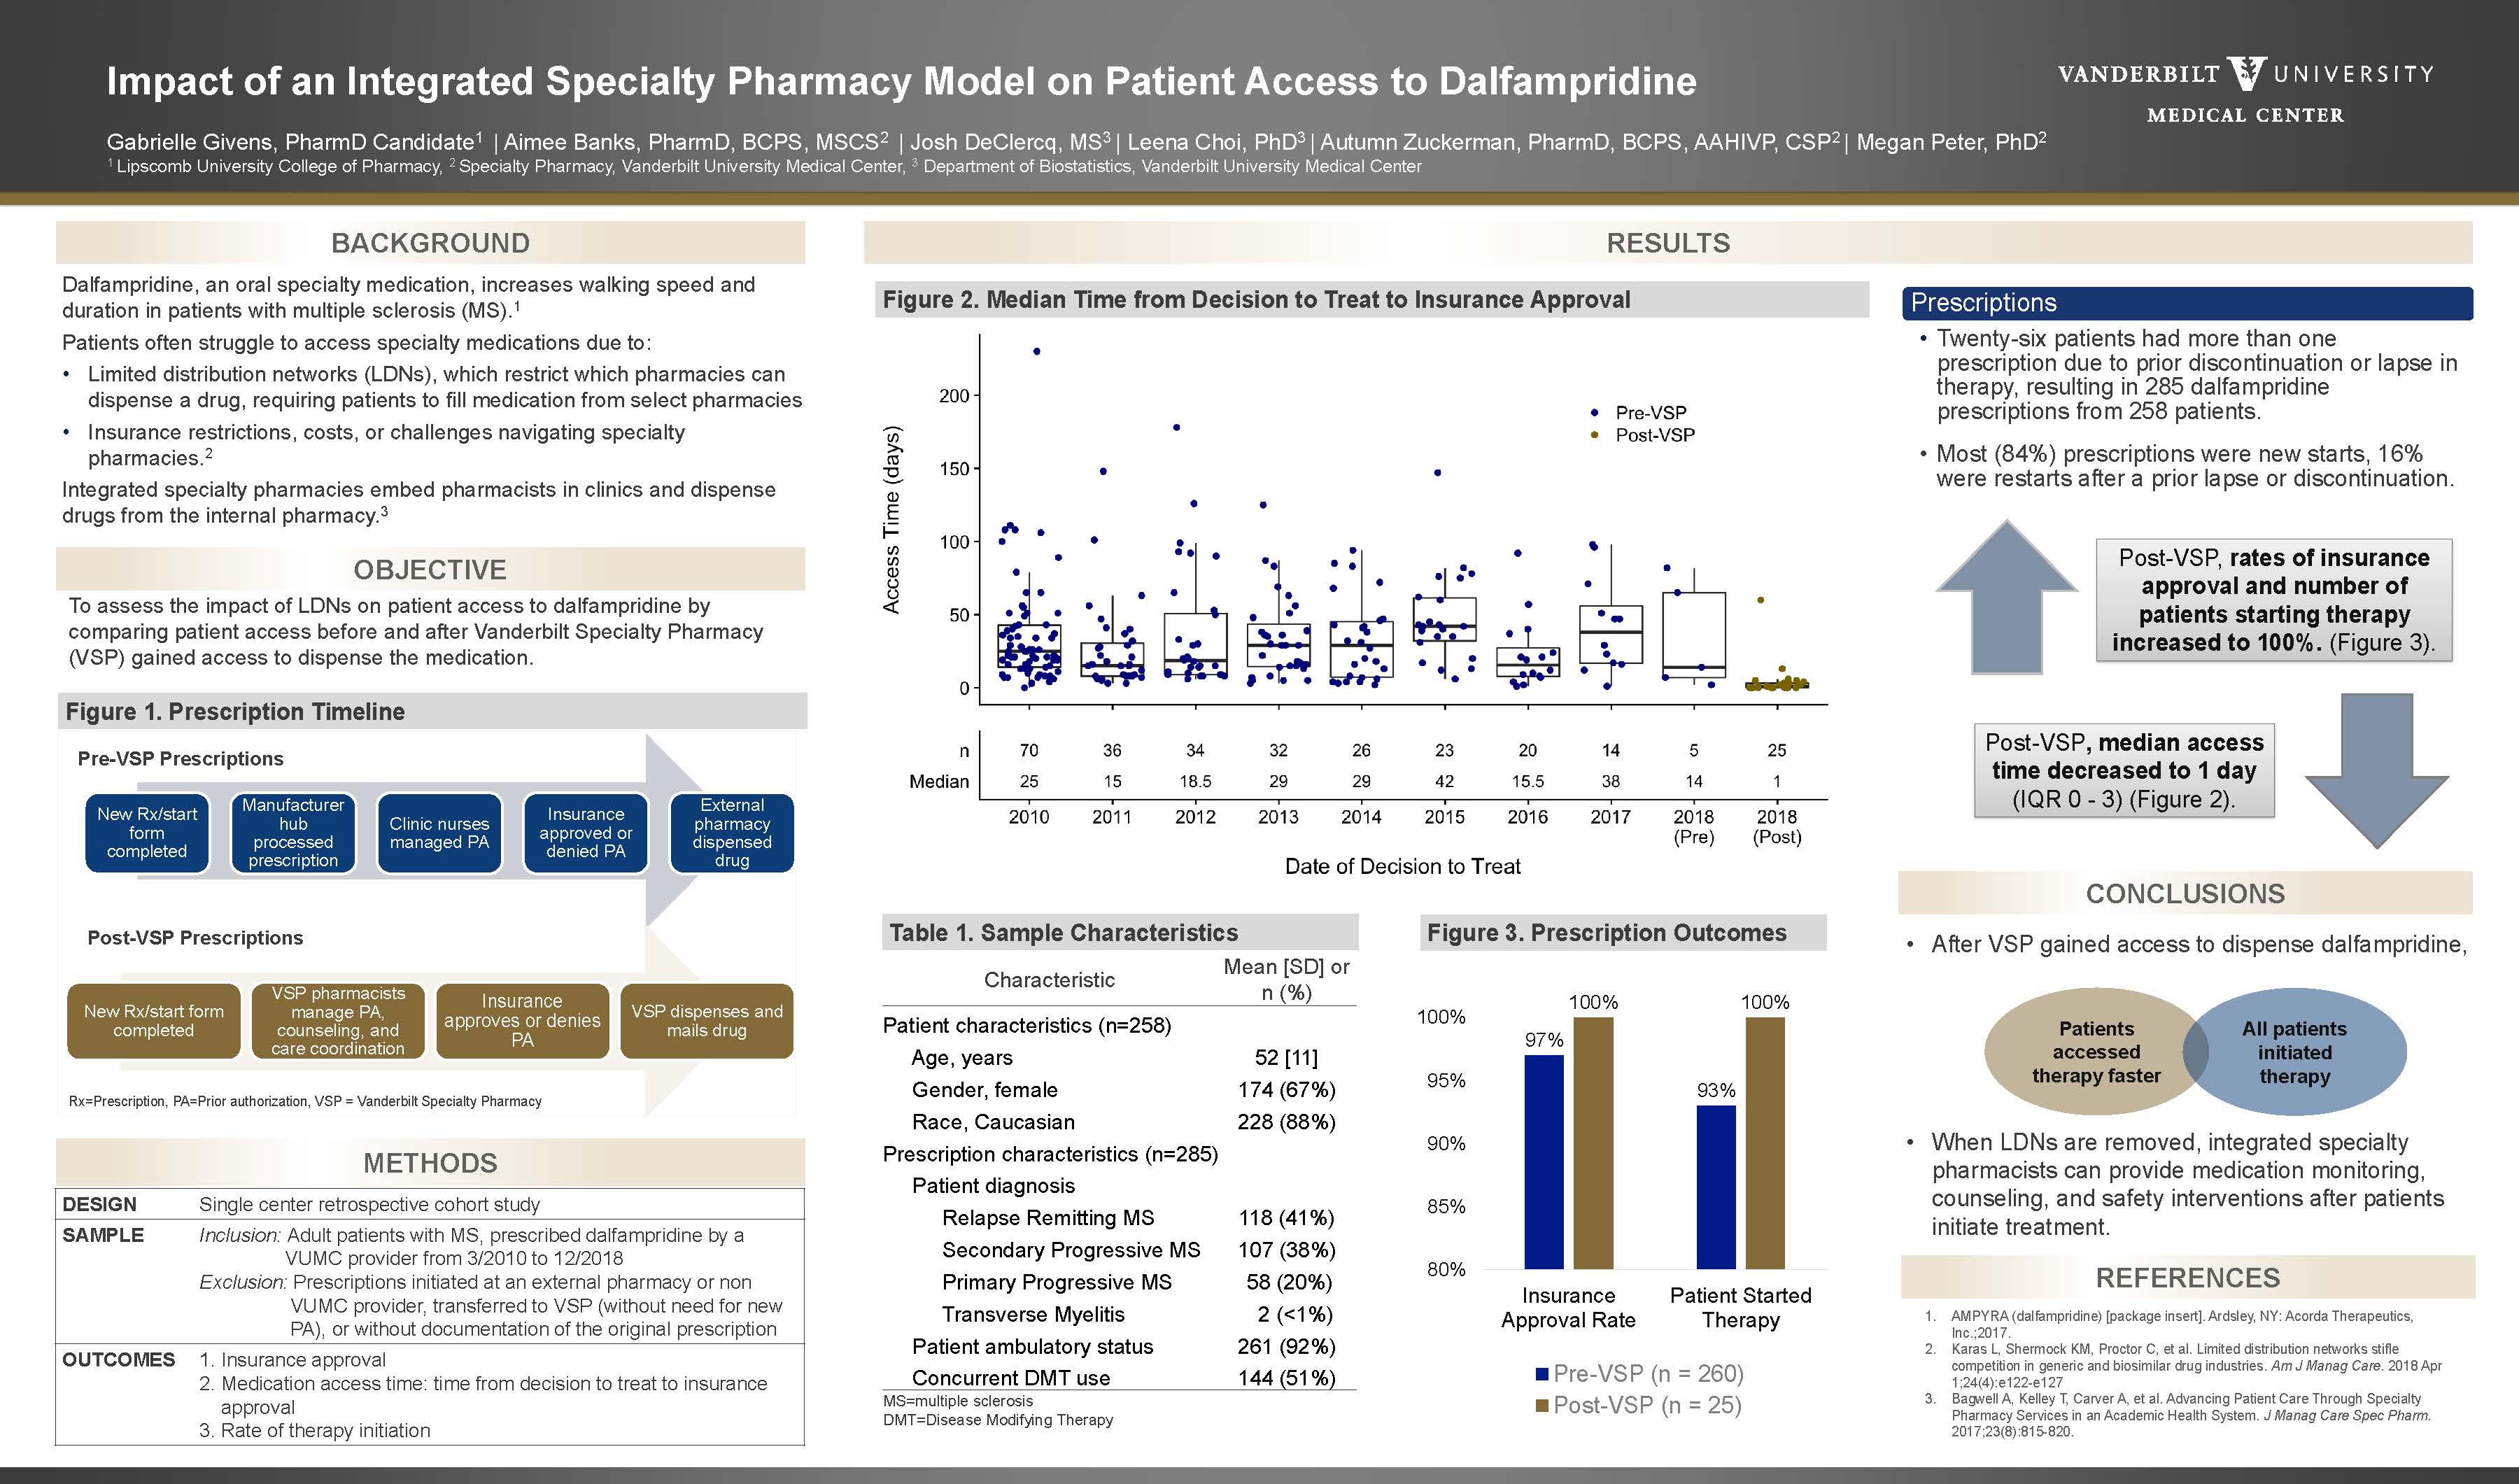 Impact of an Integrated Specialty Pharmacy Model on Patient Access to Dalfampridine